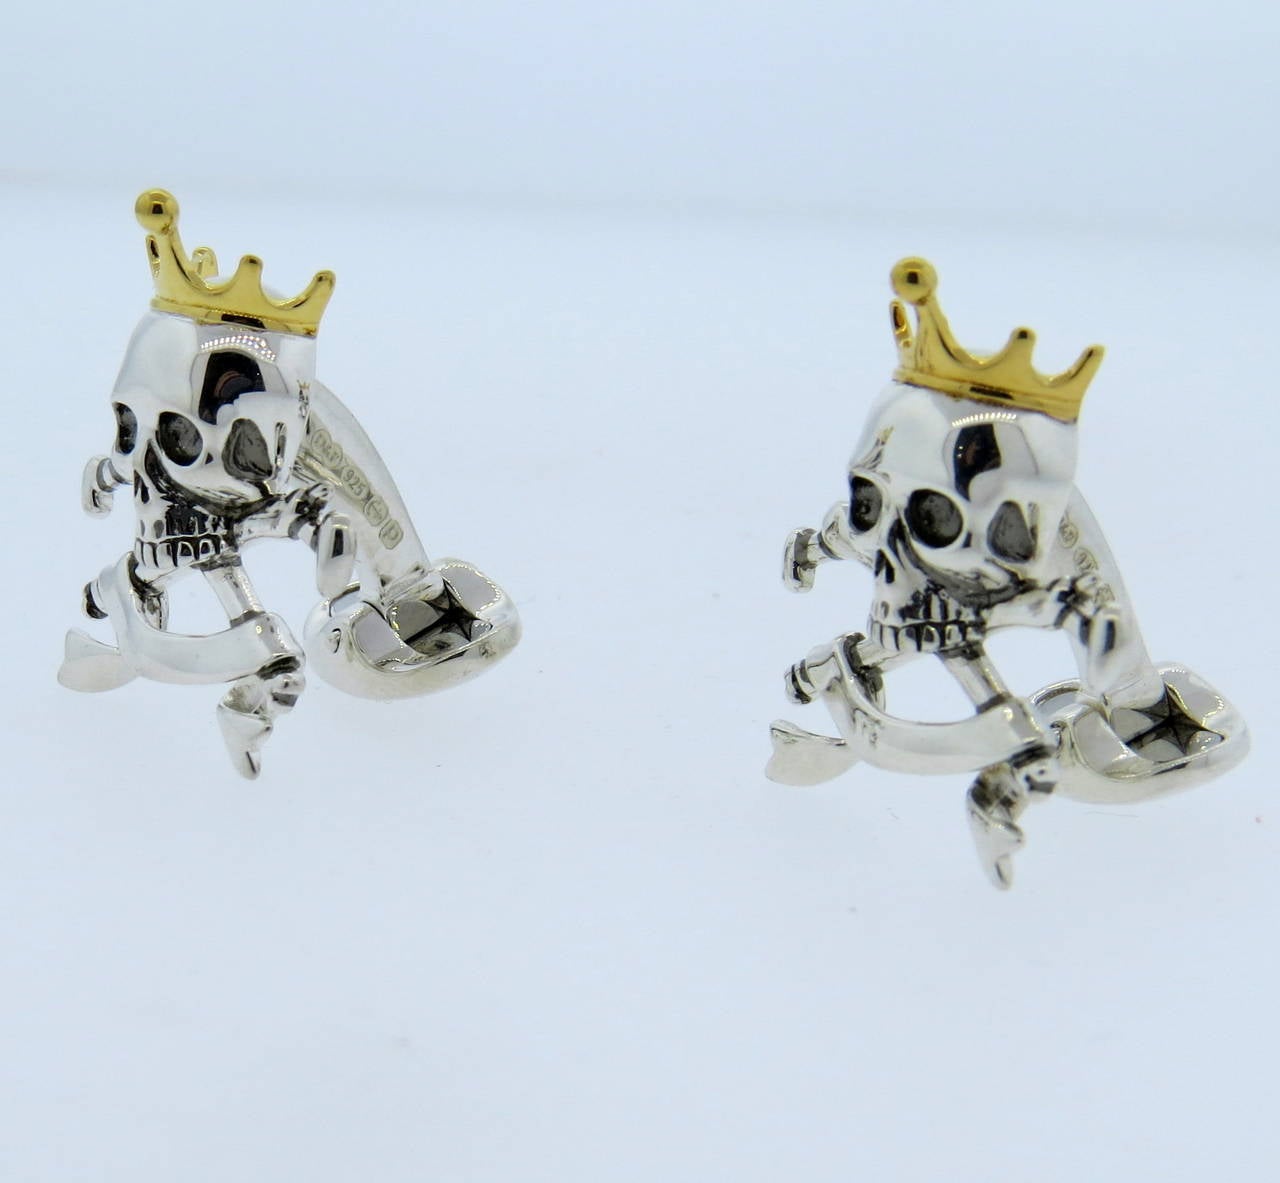 A pair of sterling silver cufflinks with gold enamel depicting skulls wearing crowns atop crossbones.  Crafted by Deakin & Francis, the cufflinks measure 28mm x 22mm and weigh 19 grams.